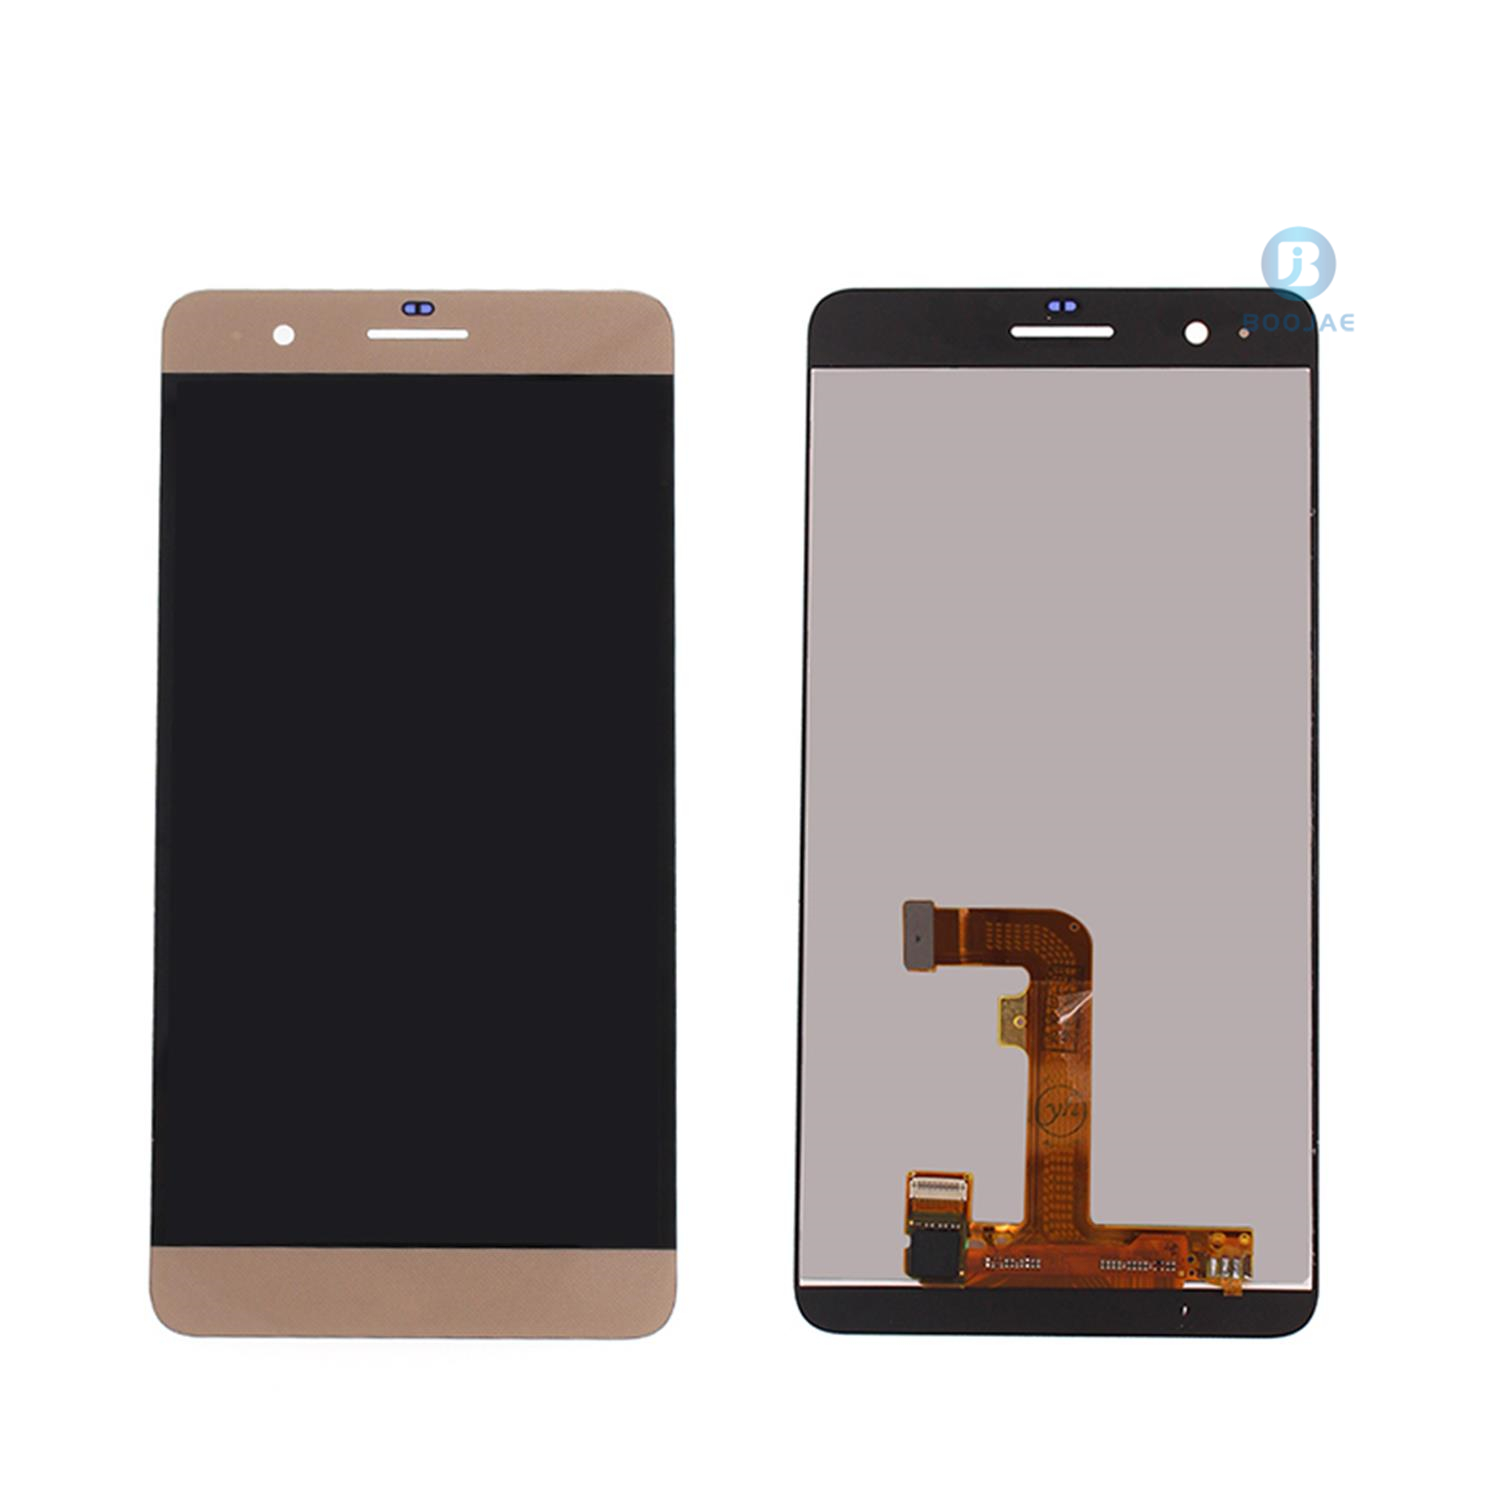 Huawei Honor 6 Plus LCD Screen Display, Lcd Assembly Replacement